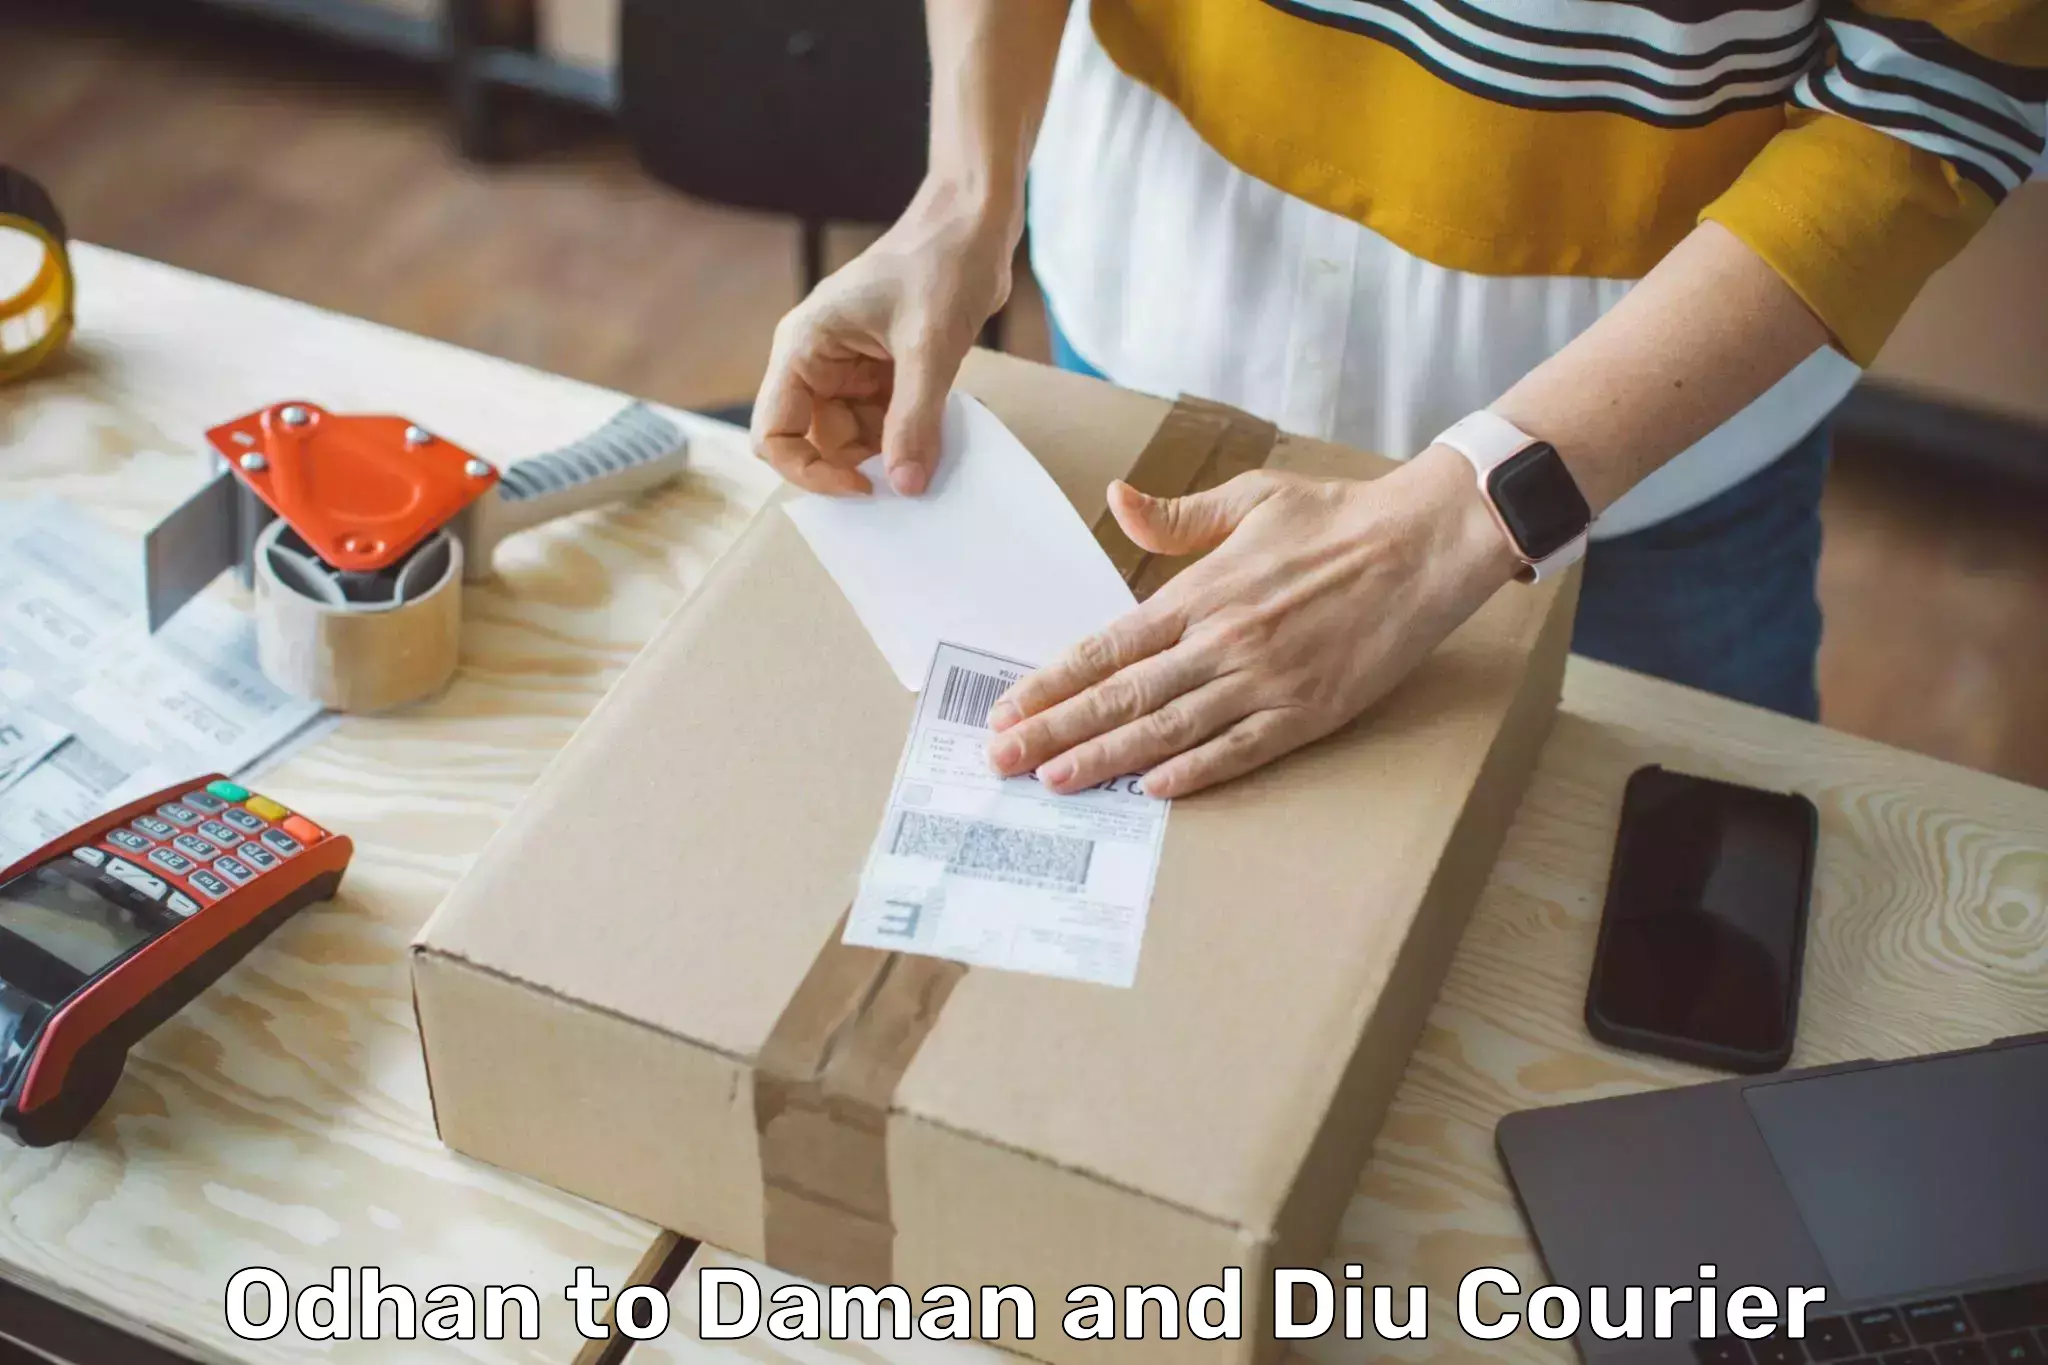 Courier service innovation in Odhan to Daman and Diu